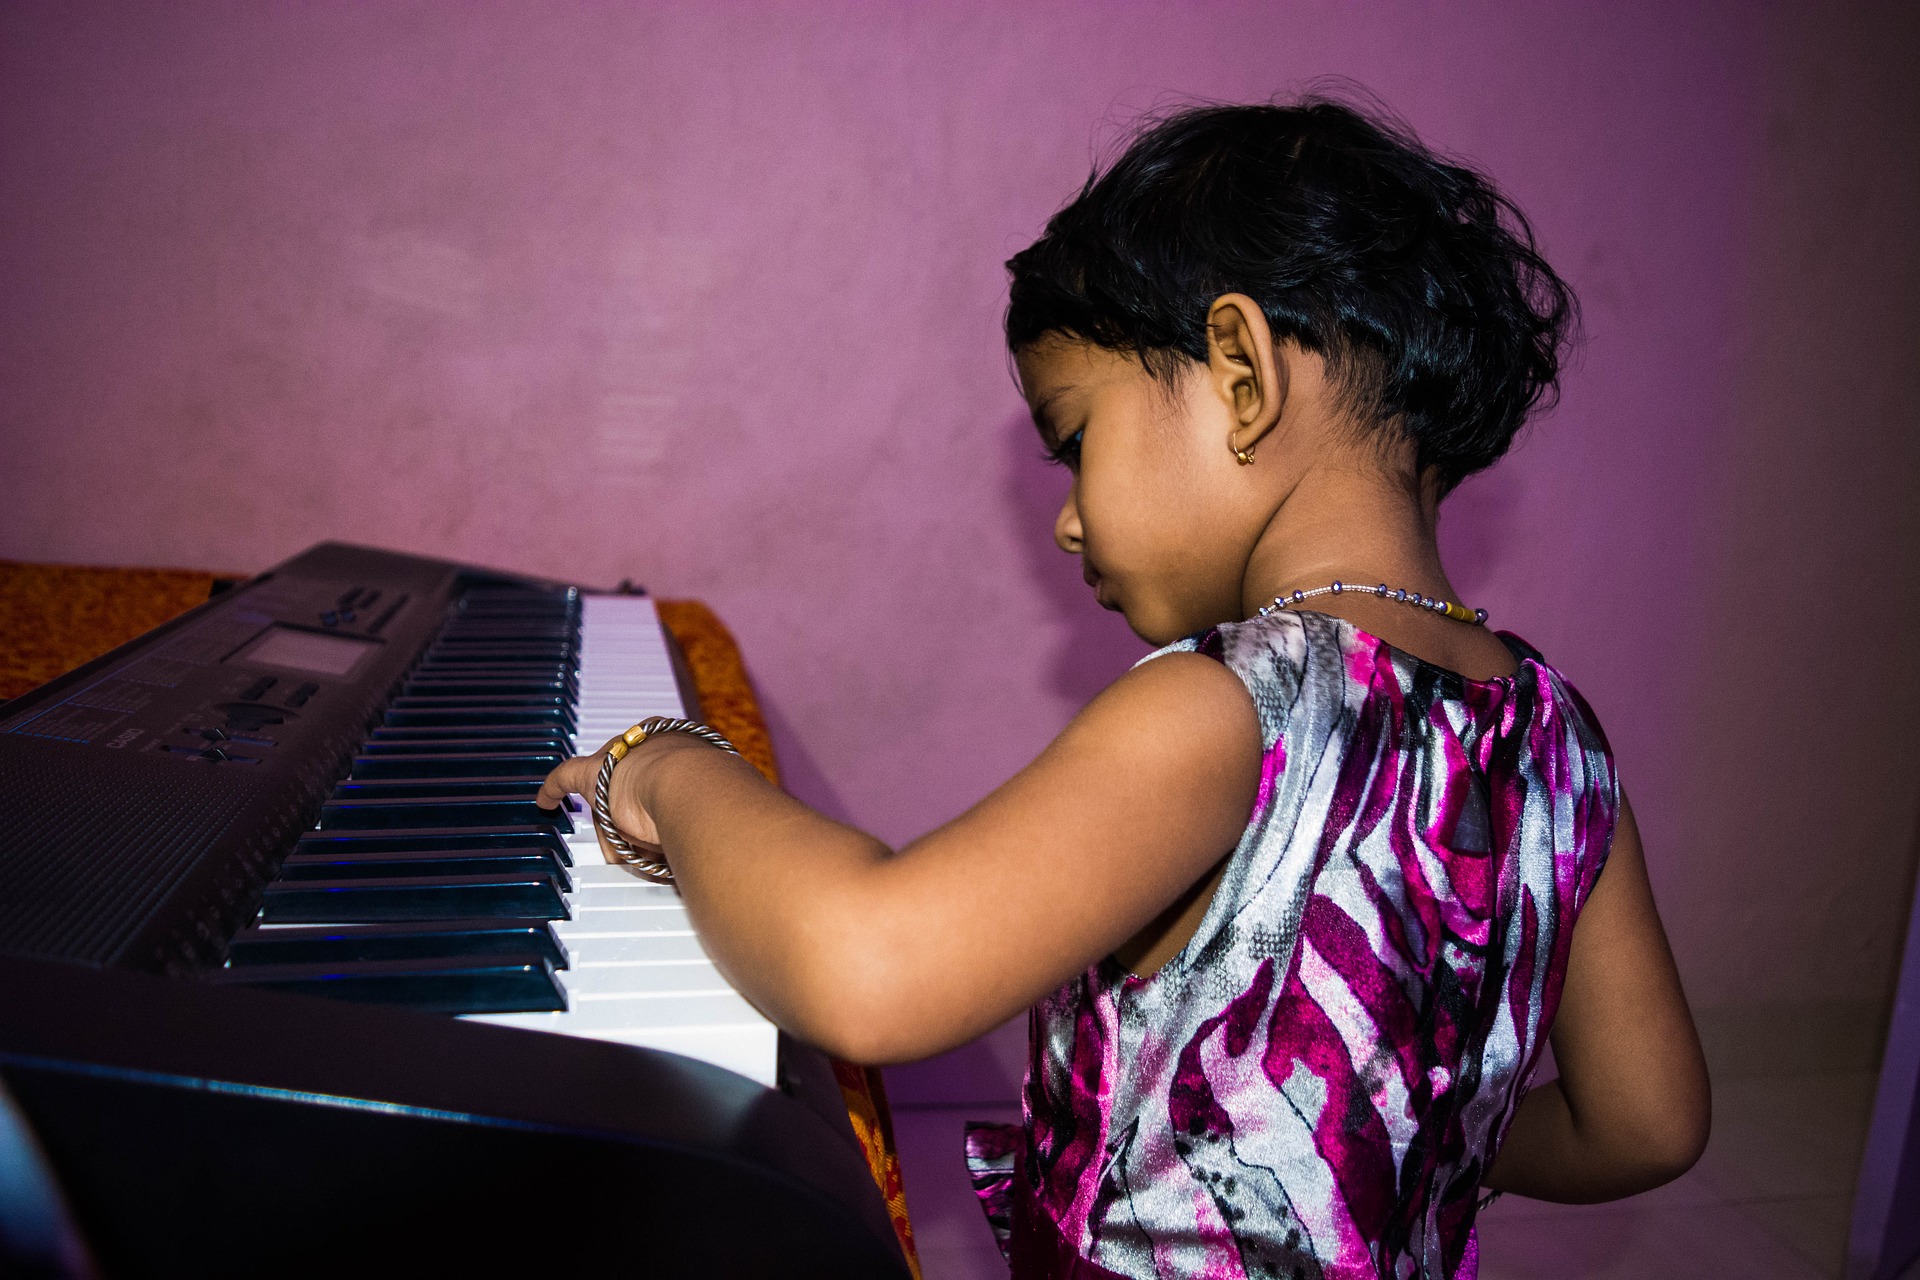 How long should a 7 year old practice piano daily? Answers from a piano teacher plus tips & strategy to help get practice done without the stress.